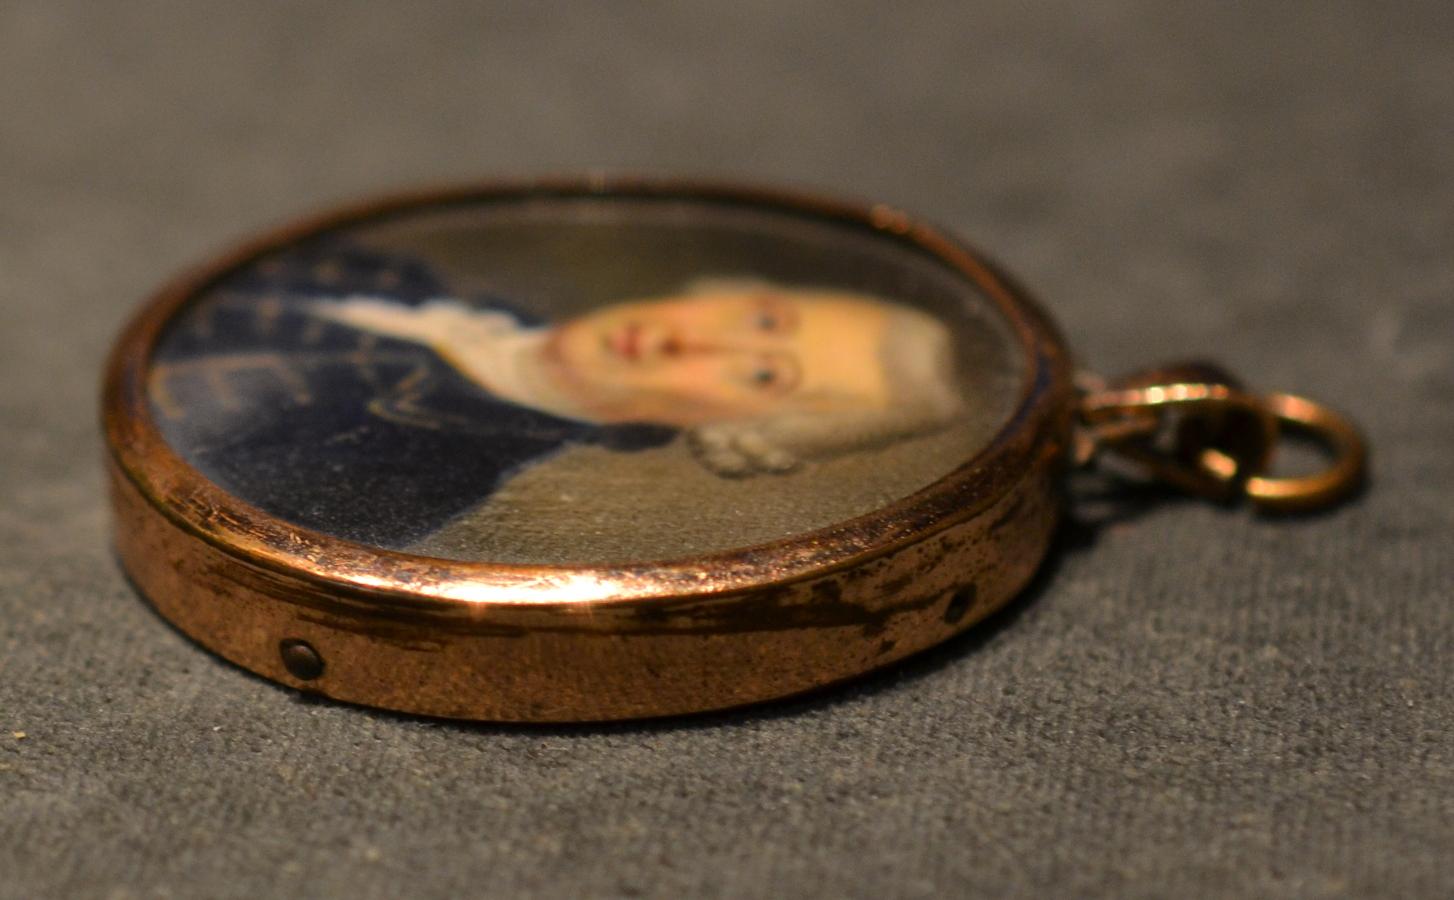 SHIPPING POLICY:
No additional costs will be added to this order.
Shipping costs will be totally covered by the seller (customs duties included). 

The pendant holding a late 18th century portrait miniature of a gentleman, mounted in gold, length